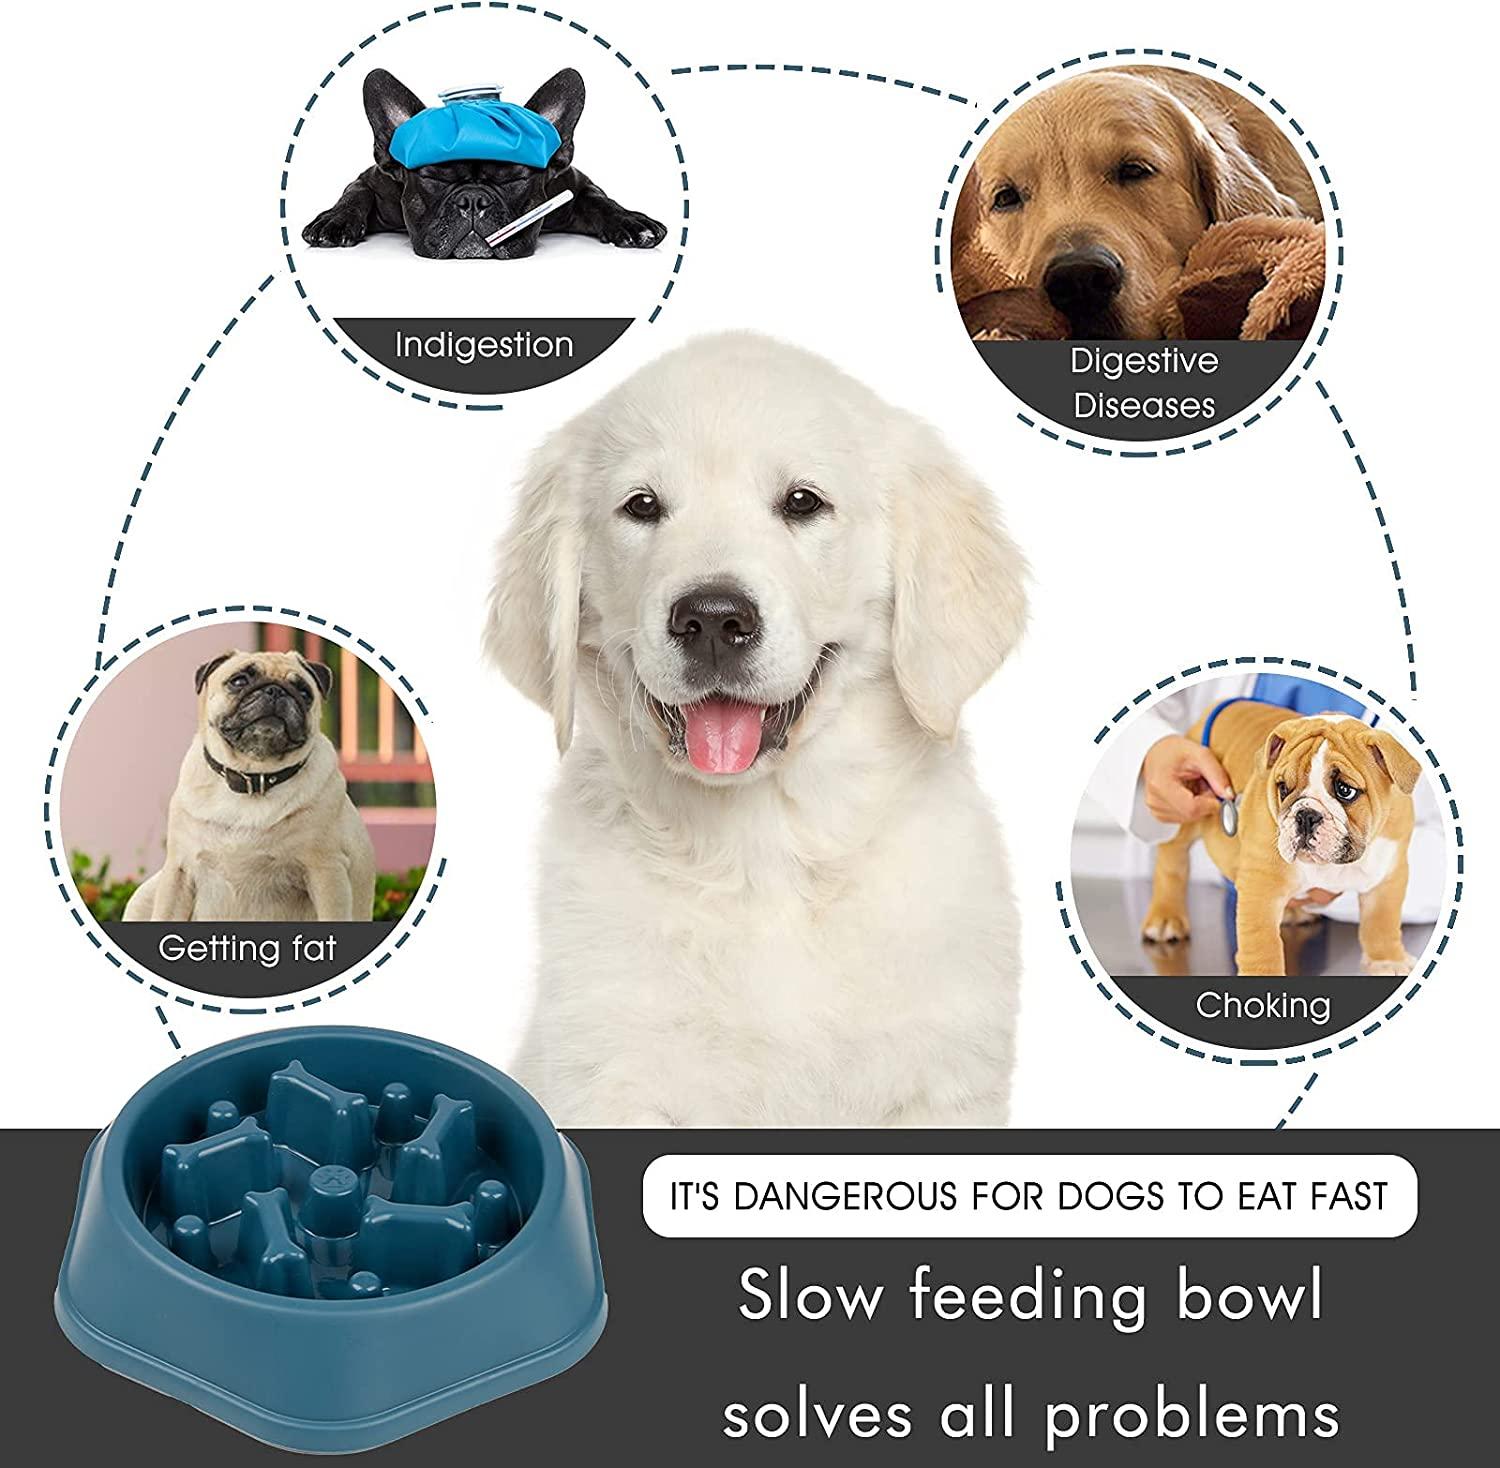 1pc Blue Pet Interactive Slow Feeder Ball Toy For Dogs, Pet Bowl